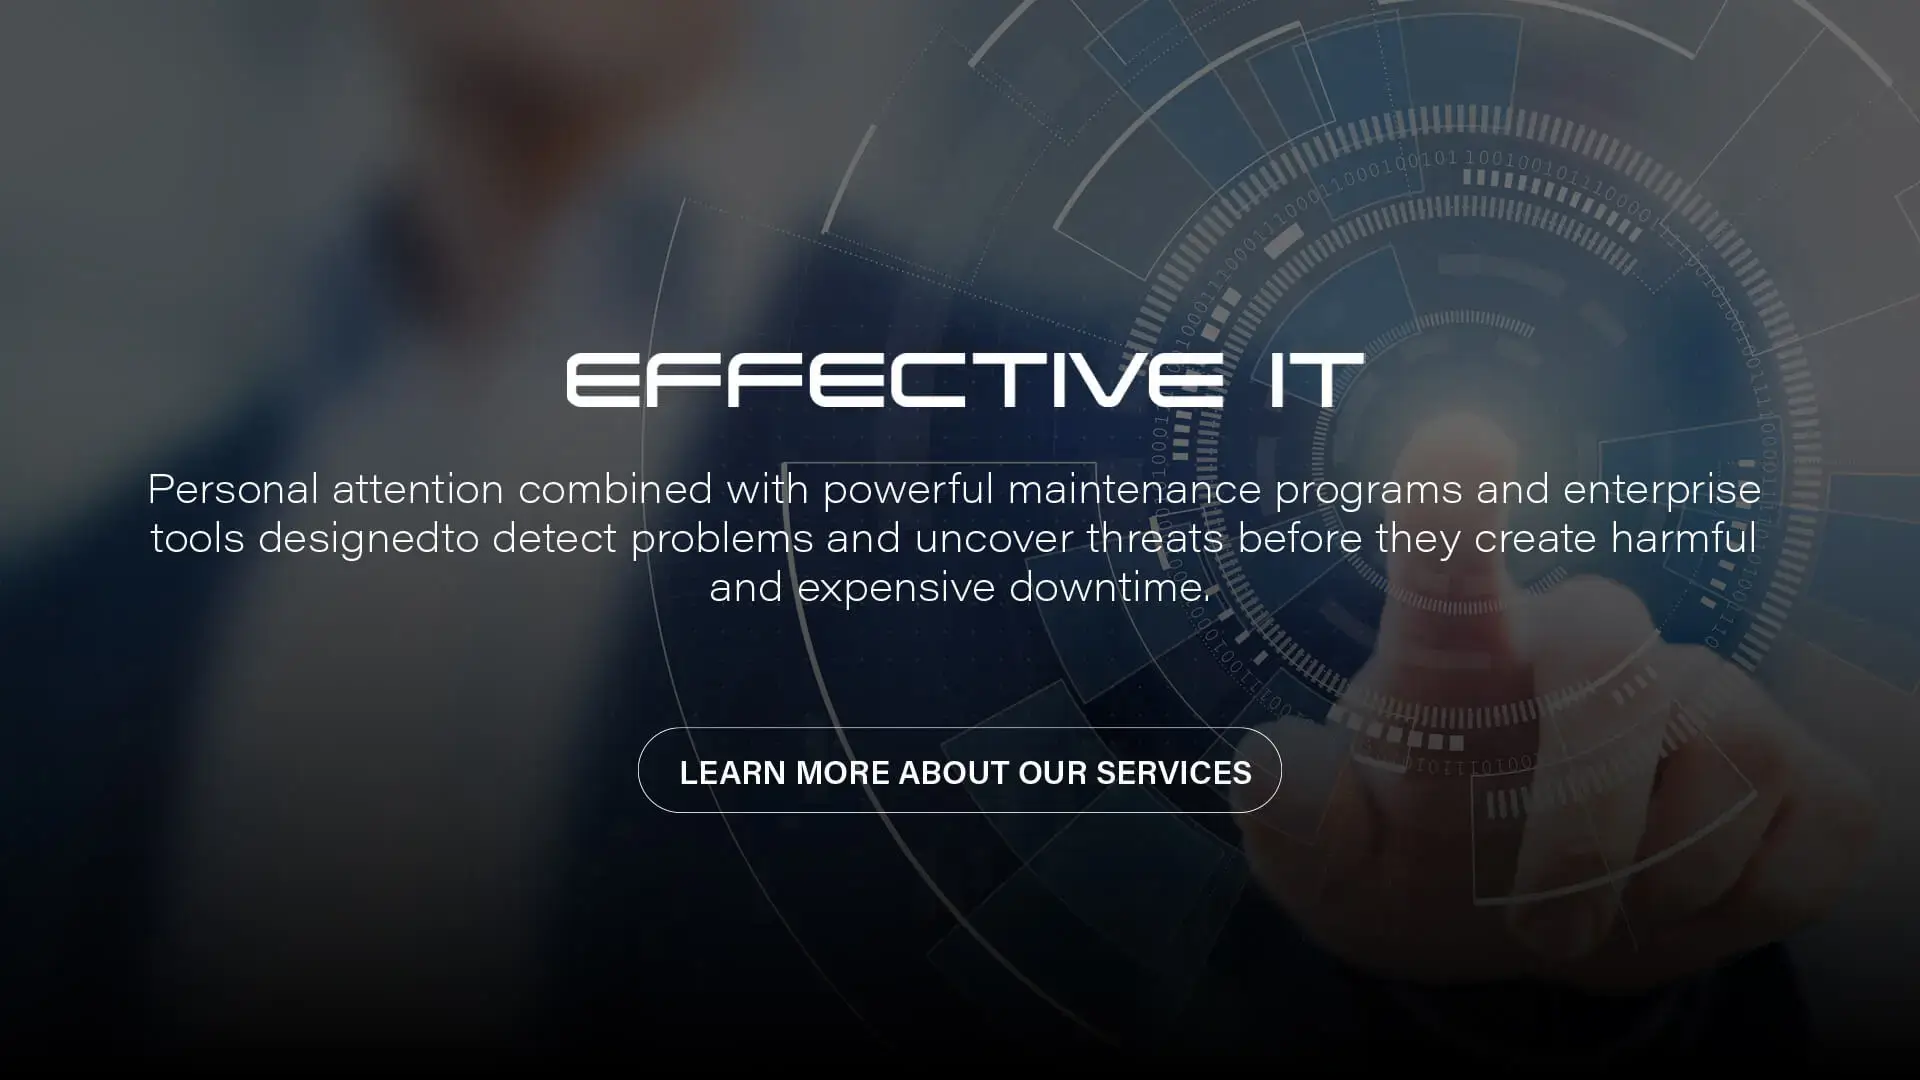 Effective IT | Personal attention combined with powerful maintenance programs and enterprise tools designed to detect problems and uncover threats before they create harmful and expensive downtime.